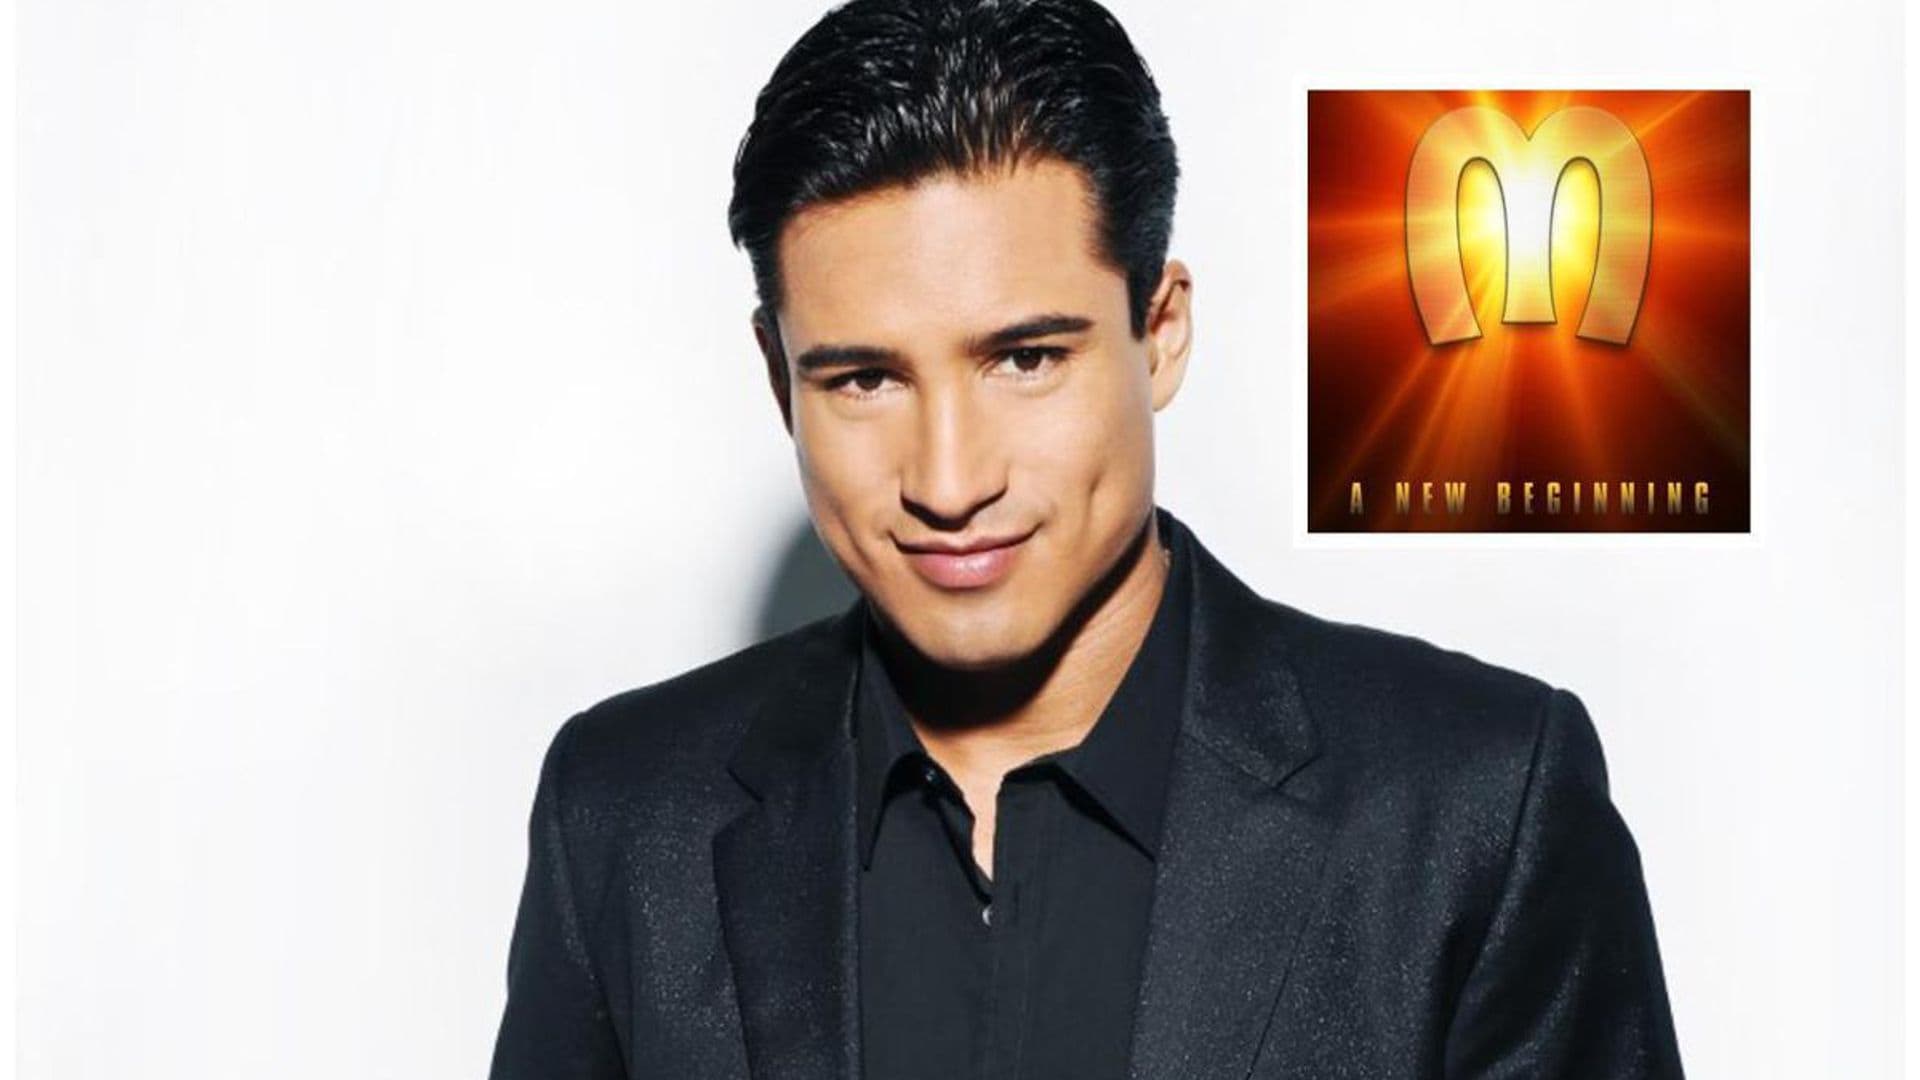 Mario Lopez set to bring back Menudo, the most famous boy band franchise in history